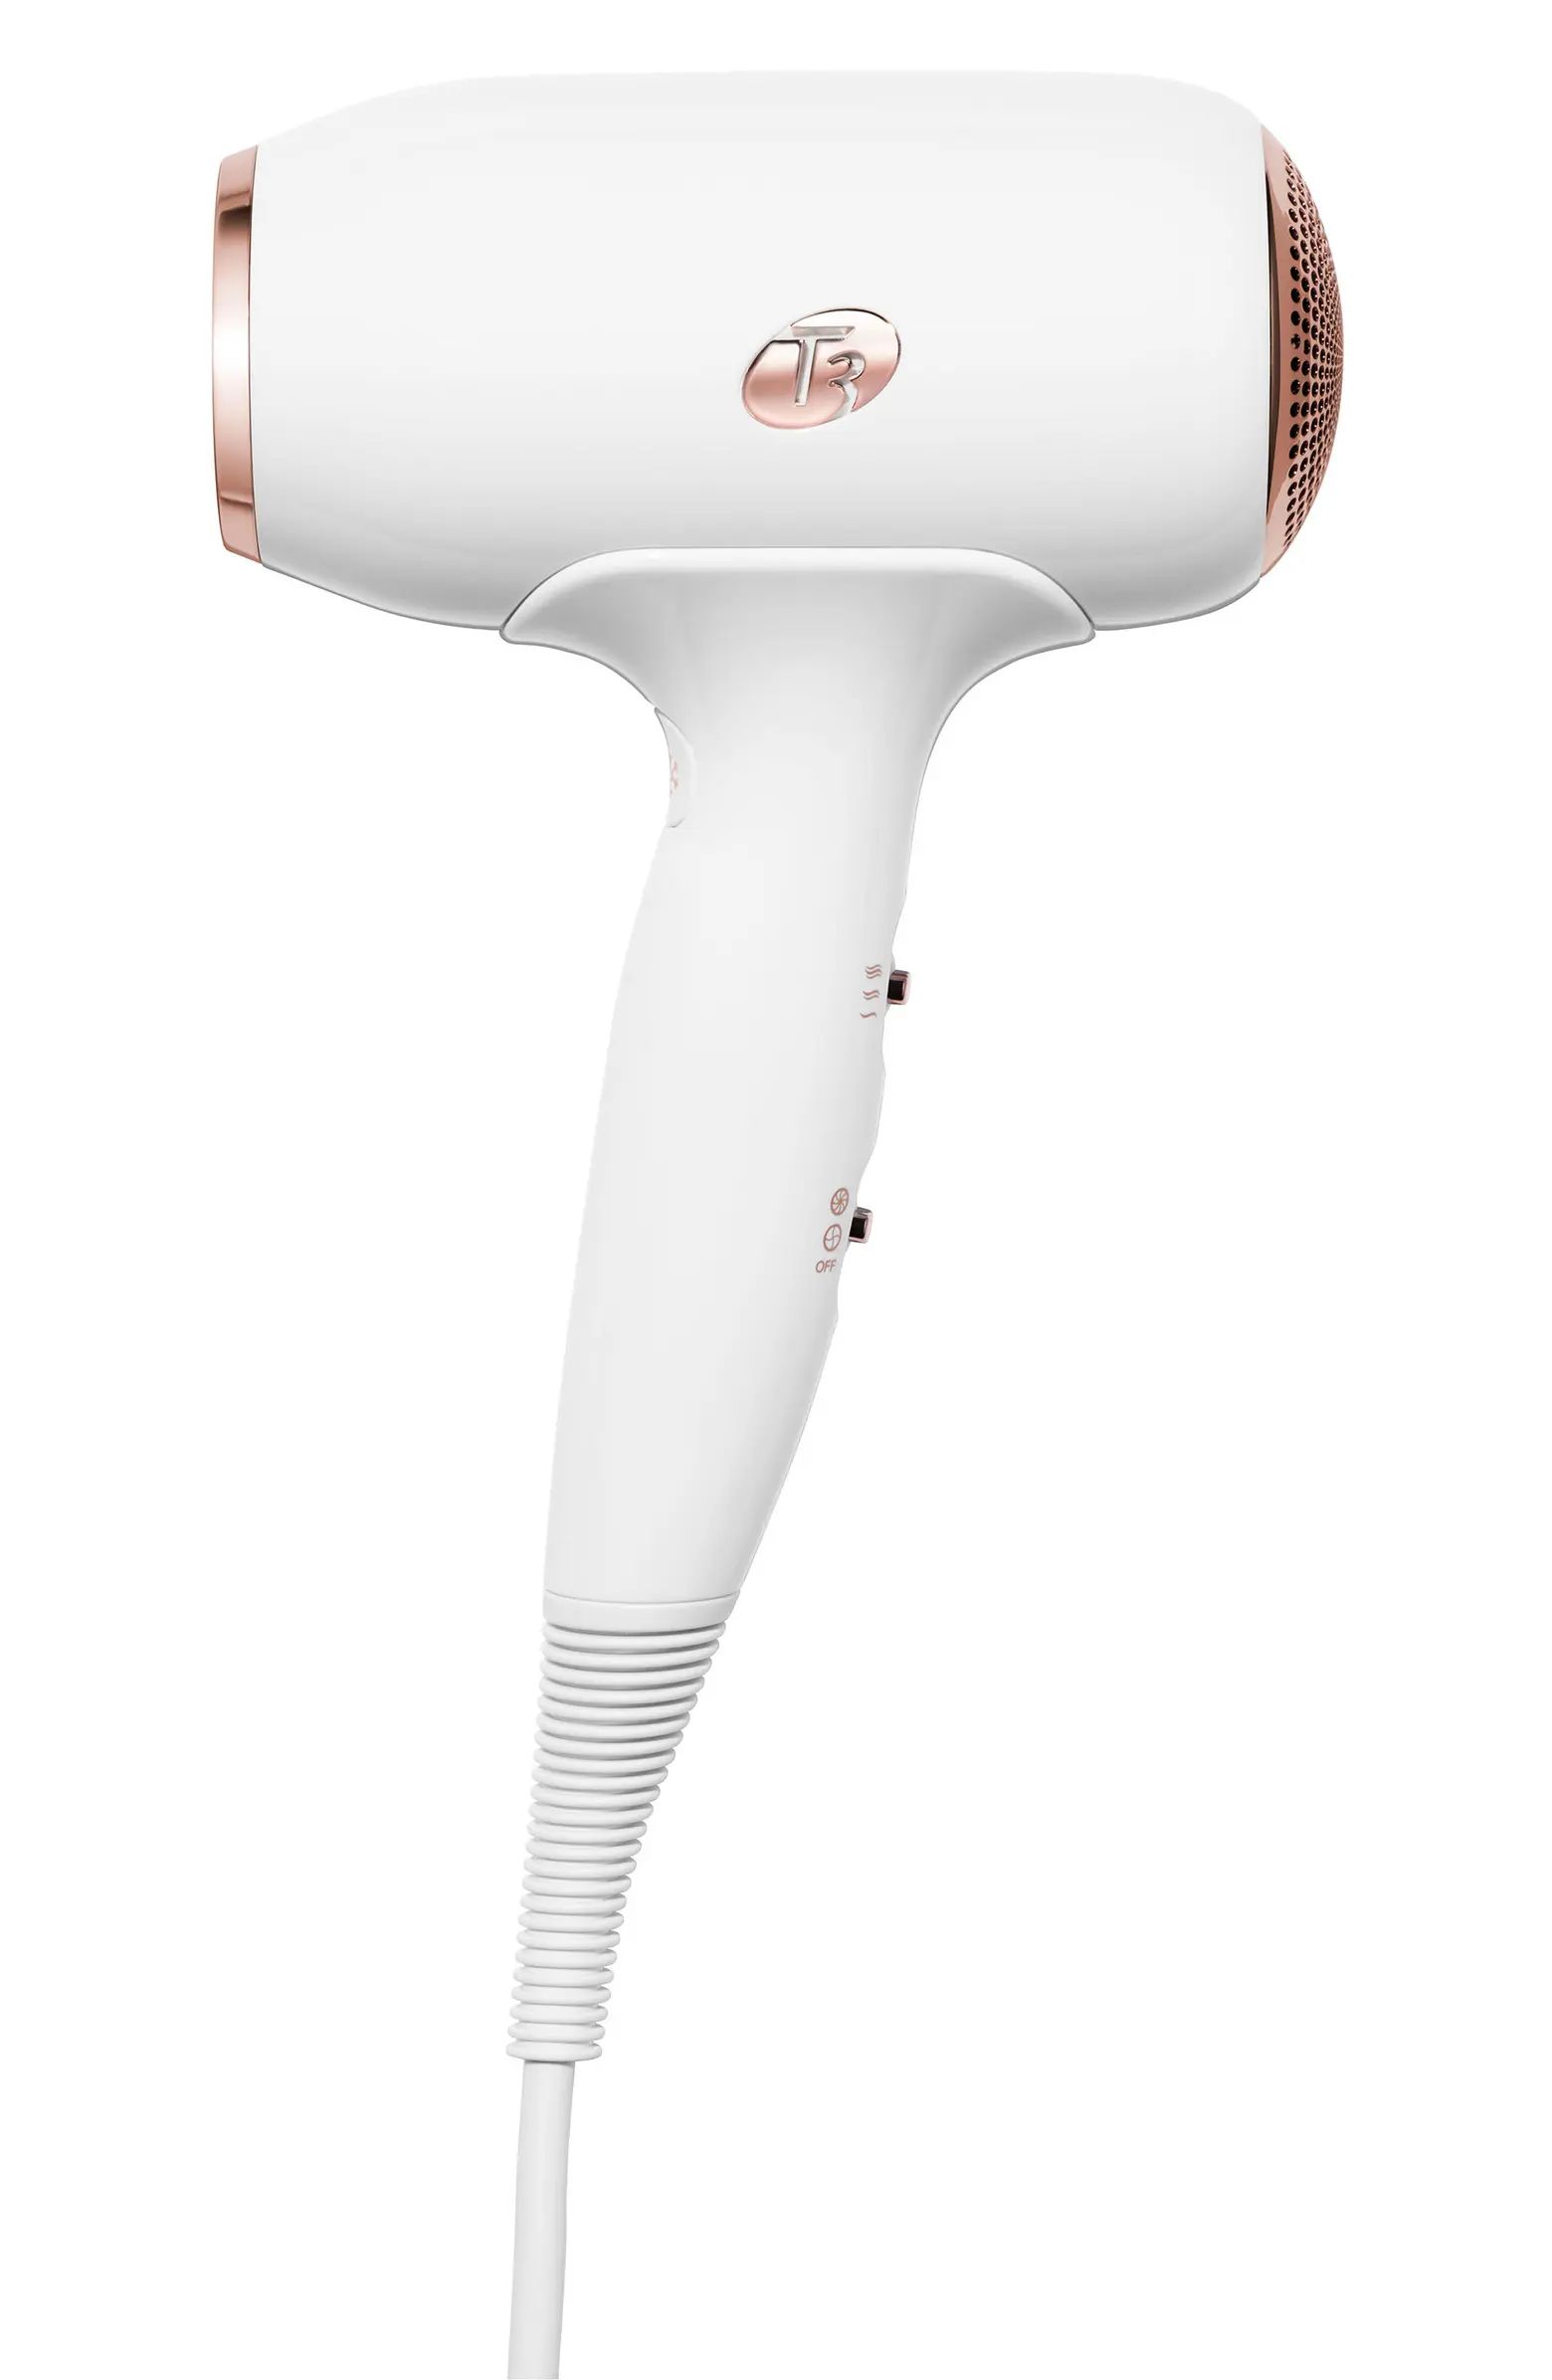 T3 Fit Compact Hair Dryer | Nordstrom | Nordstrom